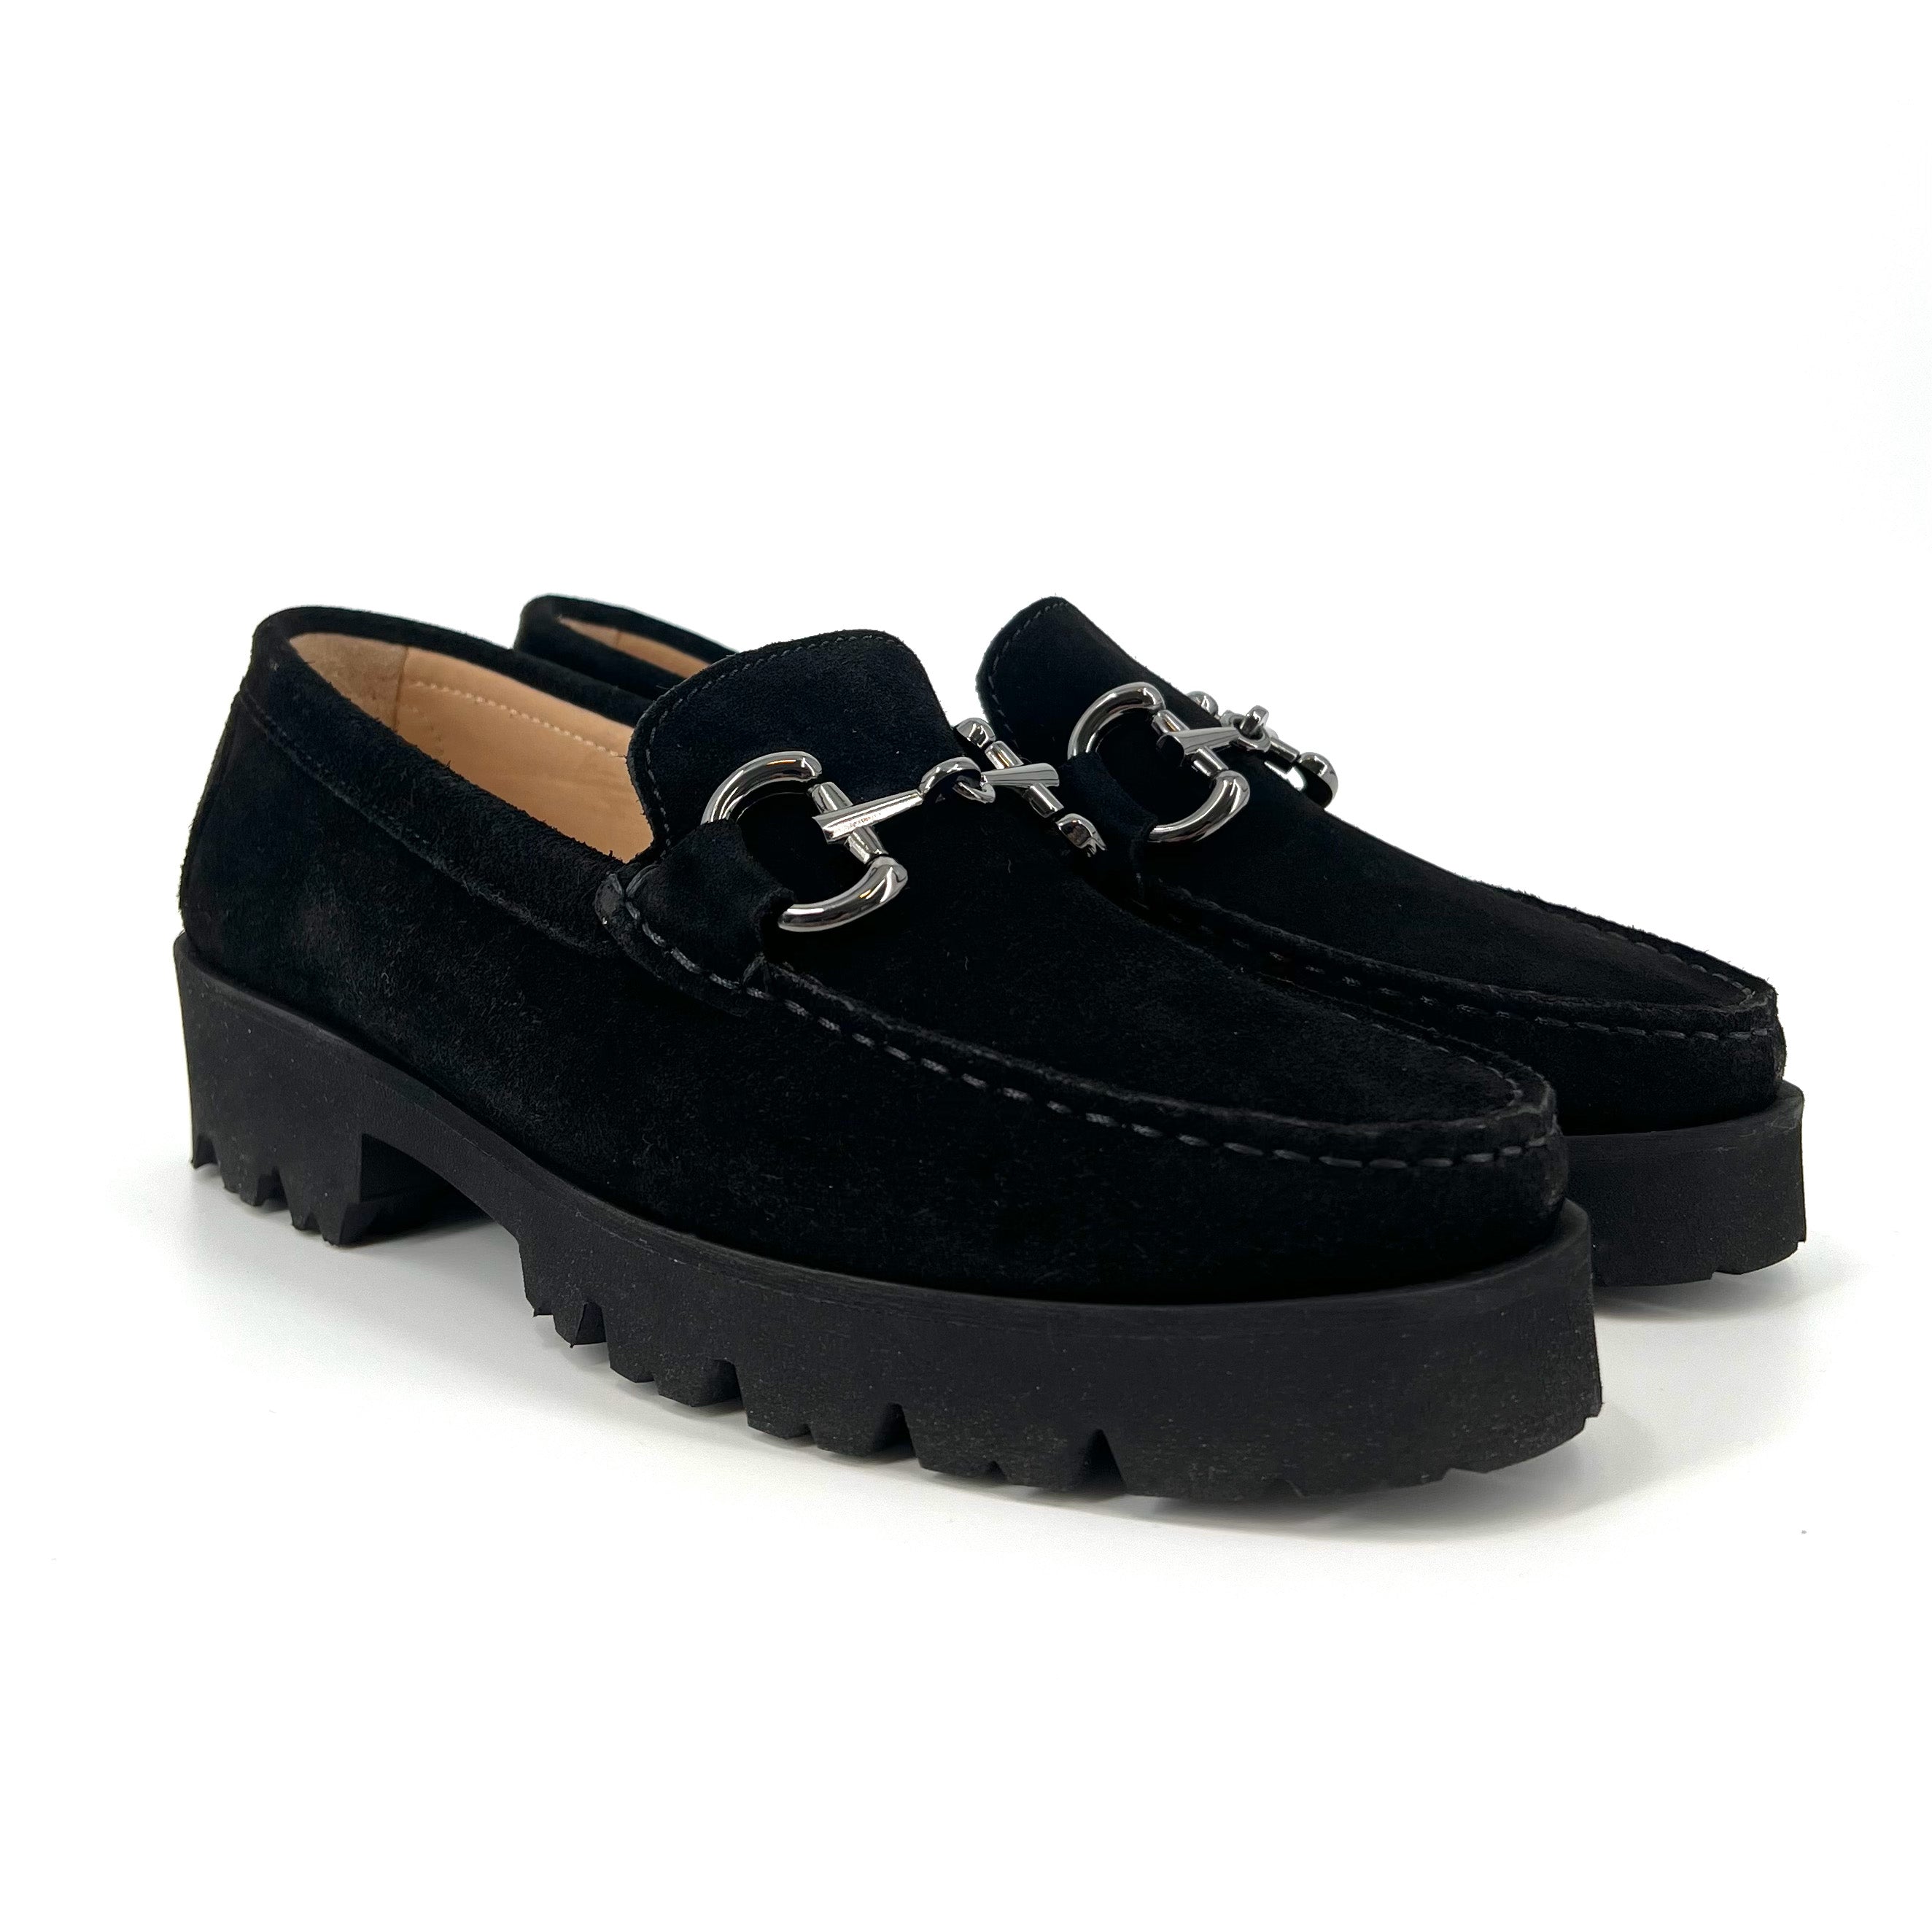 The Chunky Bit Lug Loafer in Black